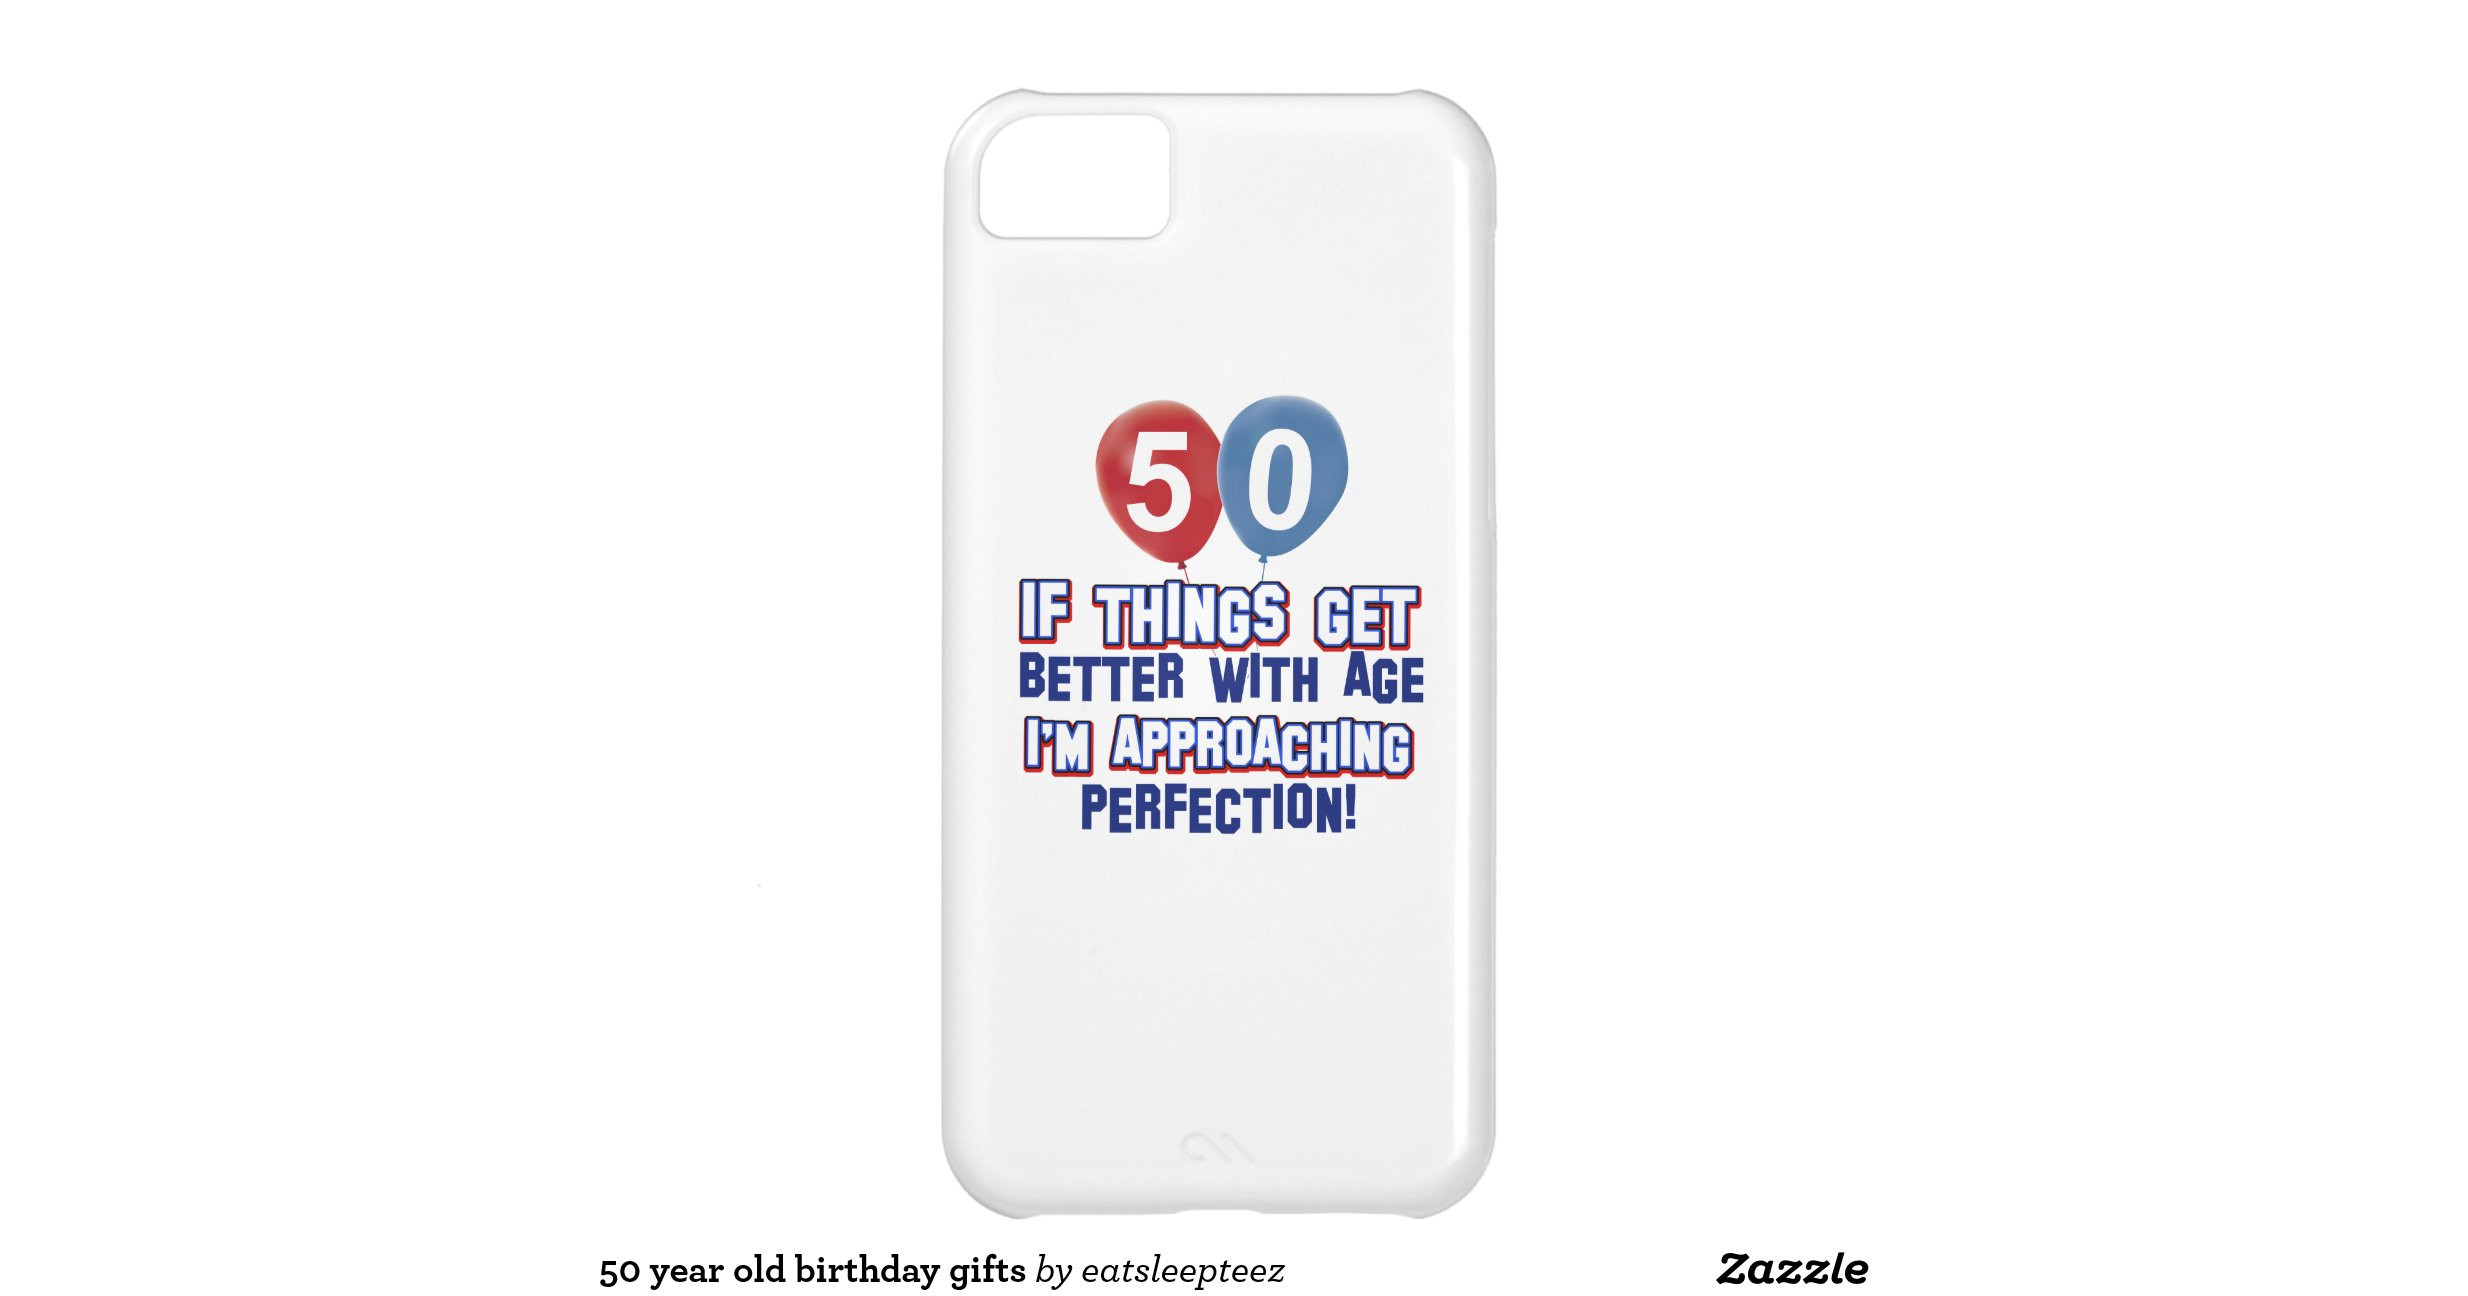 50 Year Old Birthday Gifts
 50 year old birthday ts cover for iphone 5c